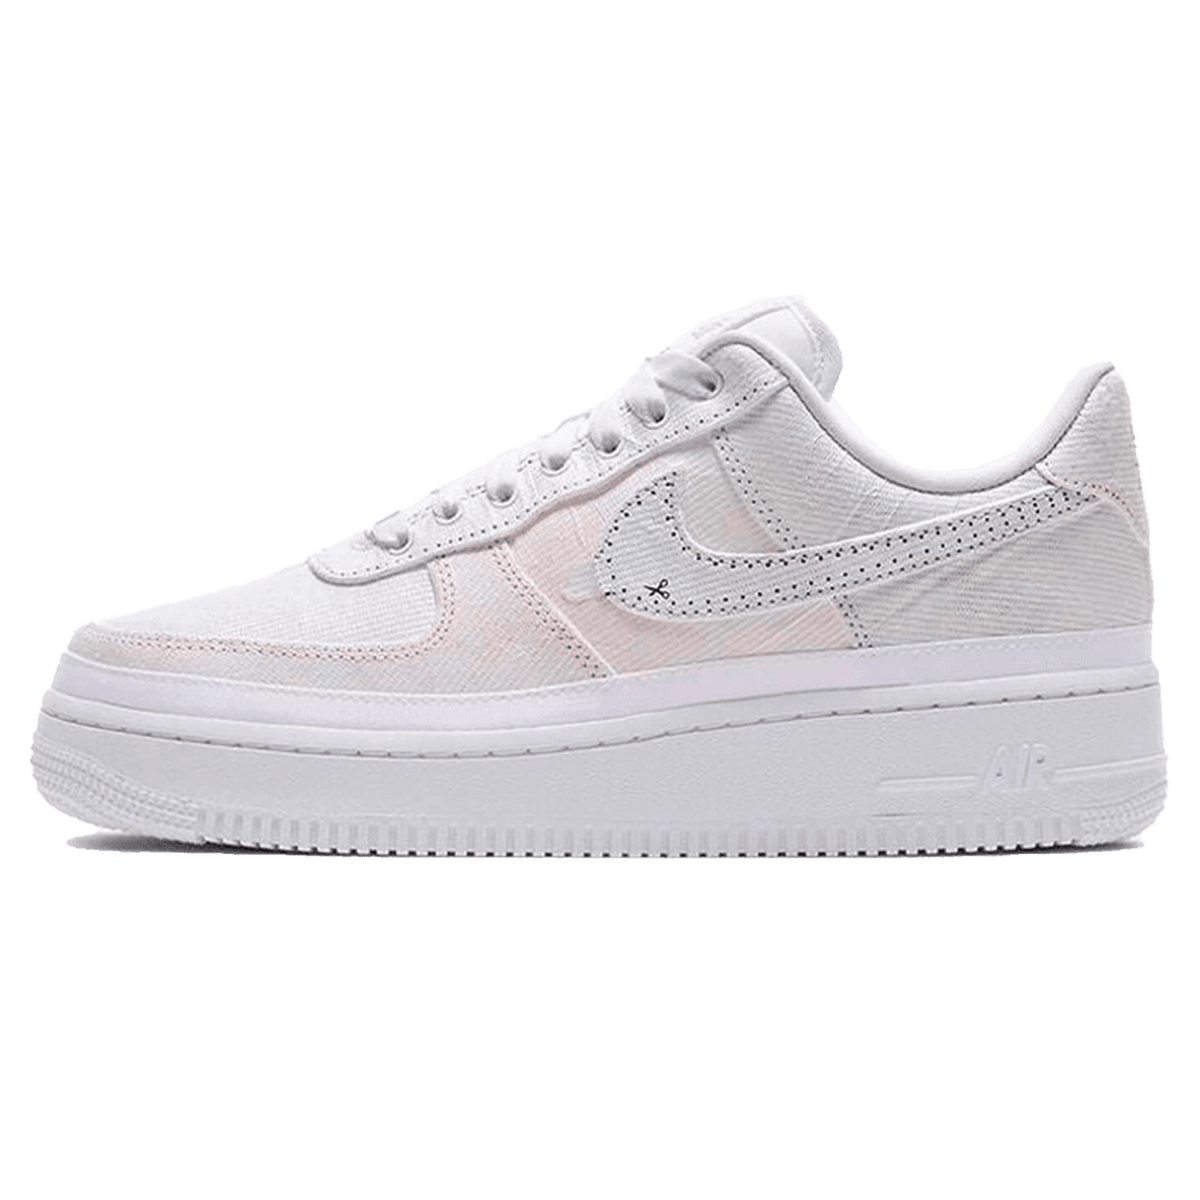 Nike Air Force 1 Low Wmns LX 'Reveal' - Kick Game